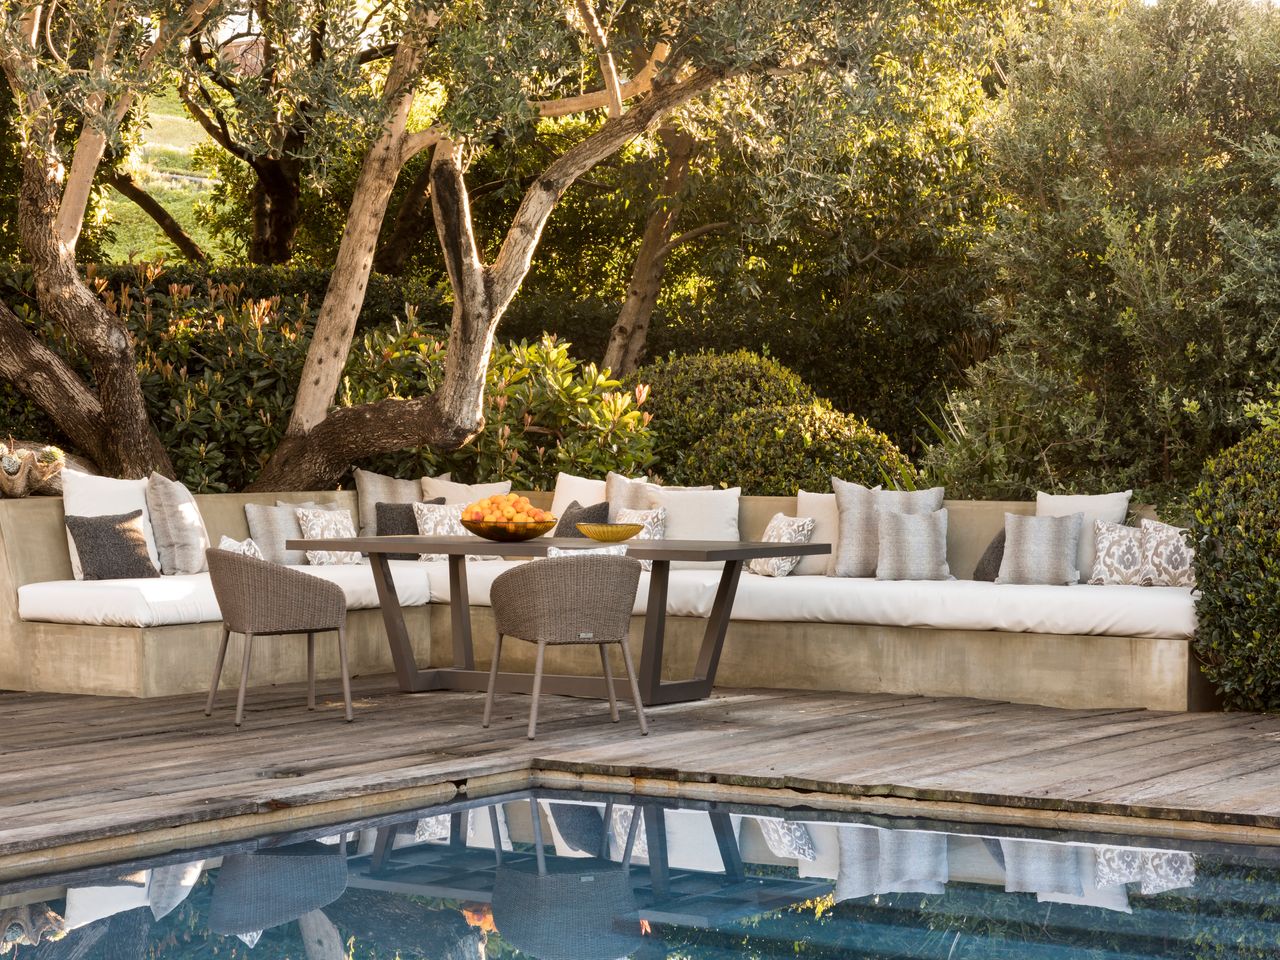 Common Mistakes to Avoid When Decorating Your Patio (Part One)